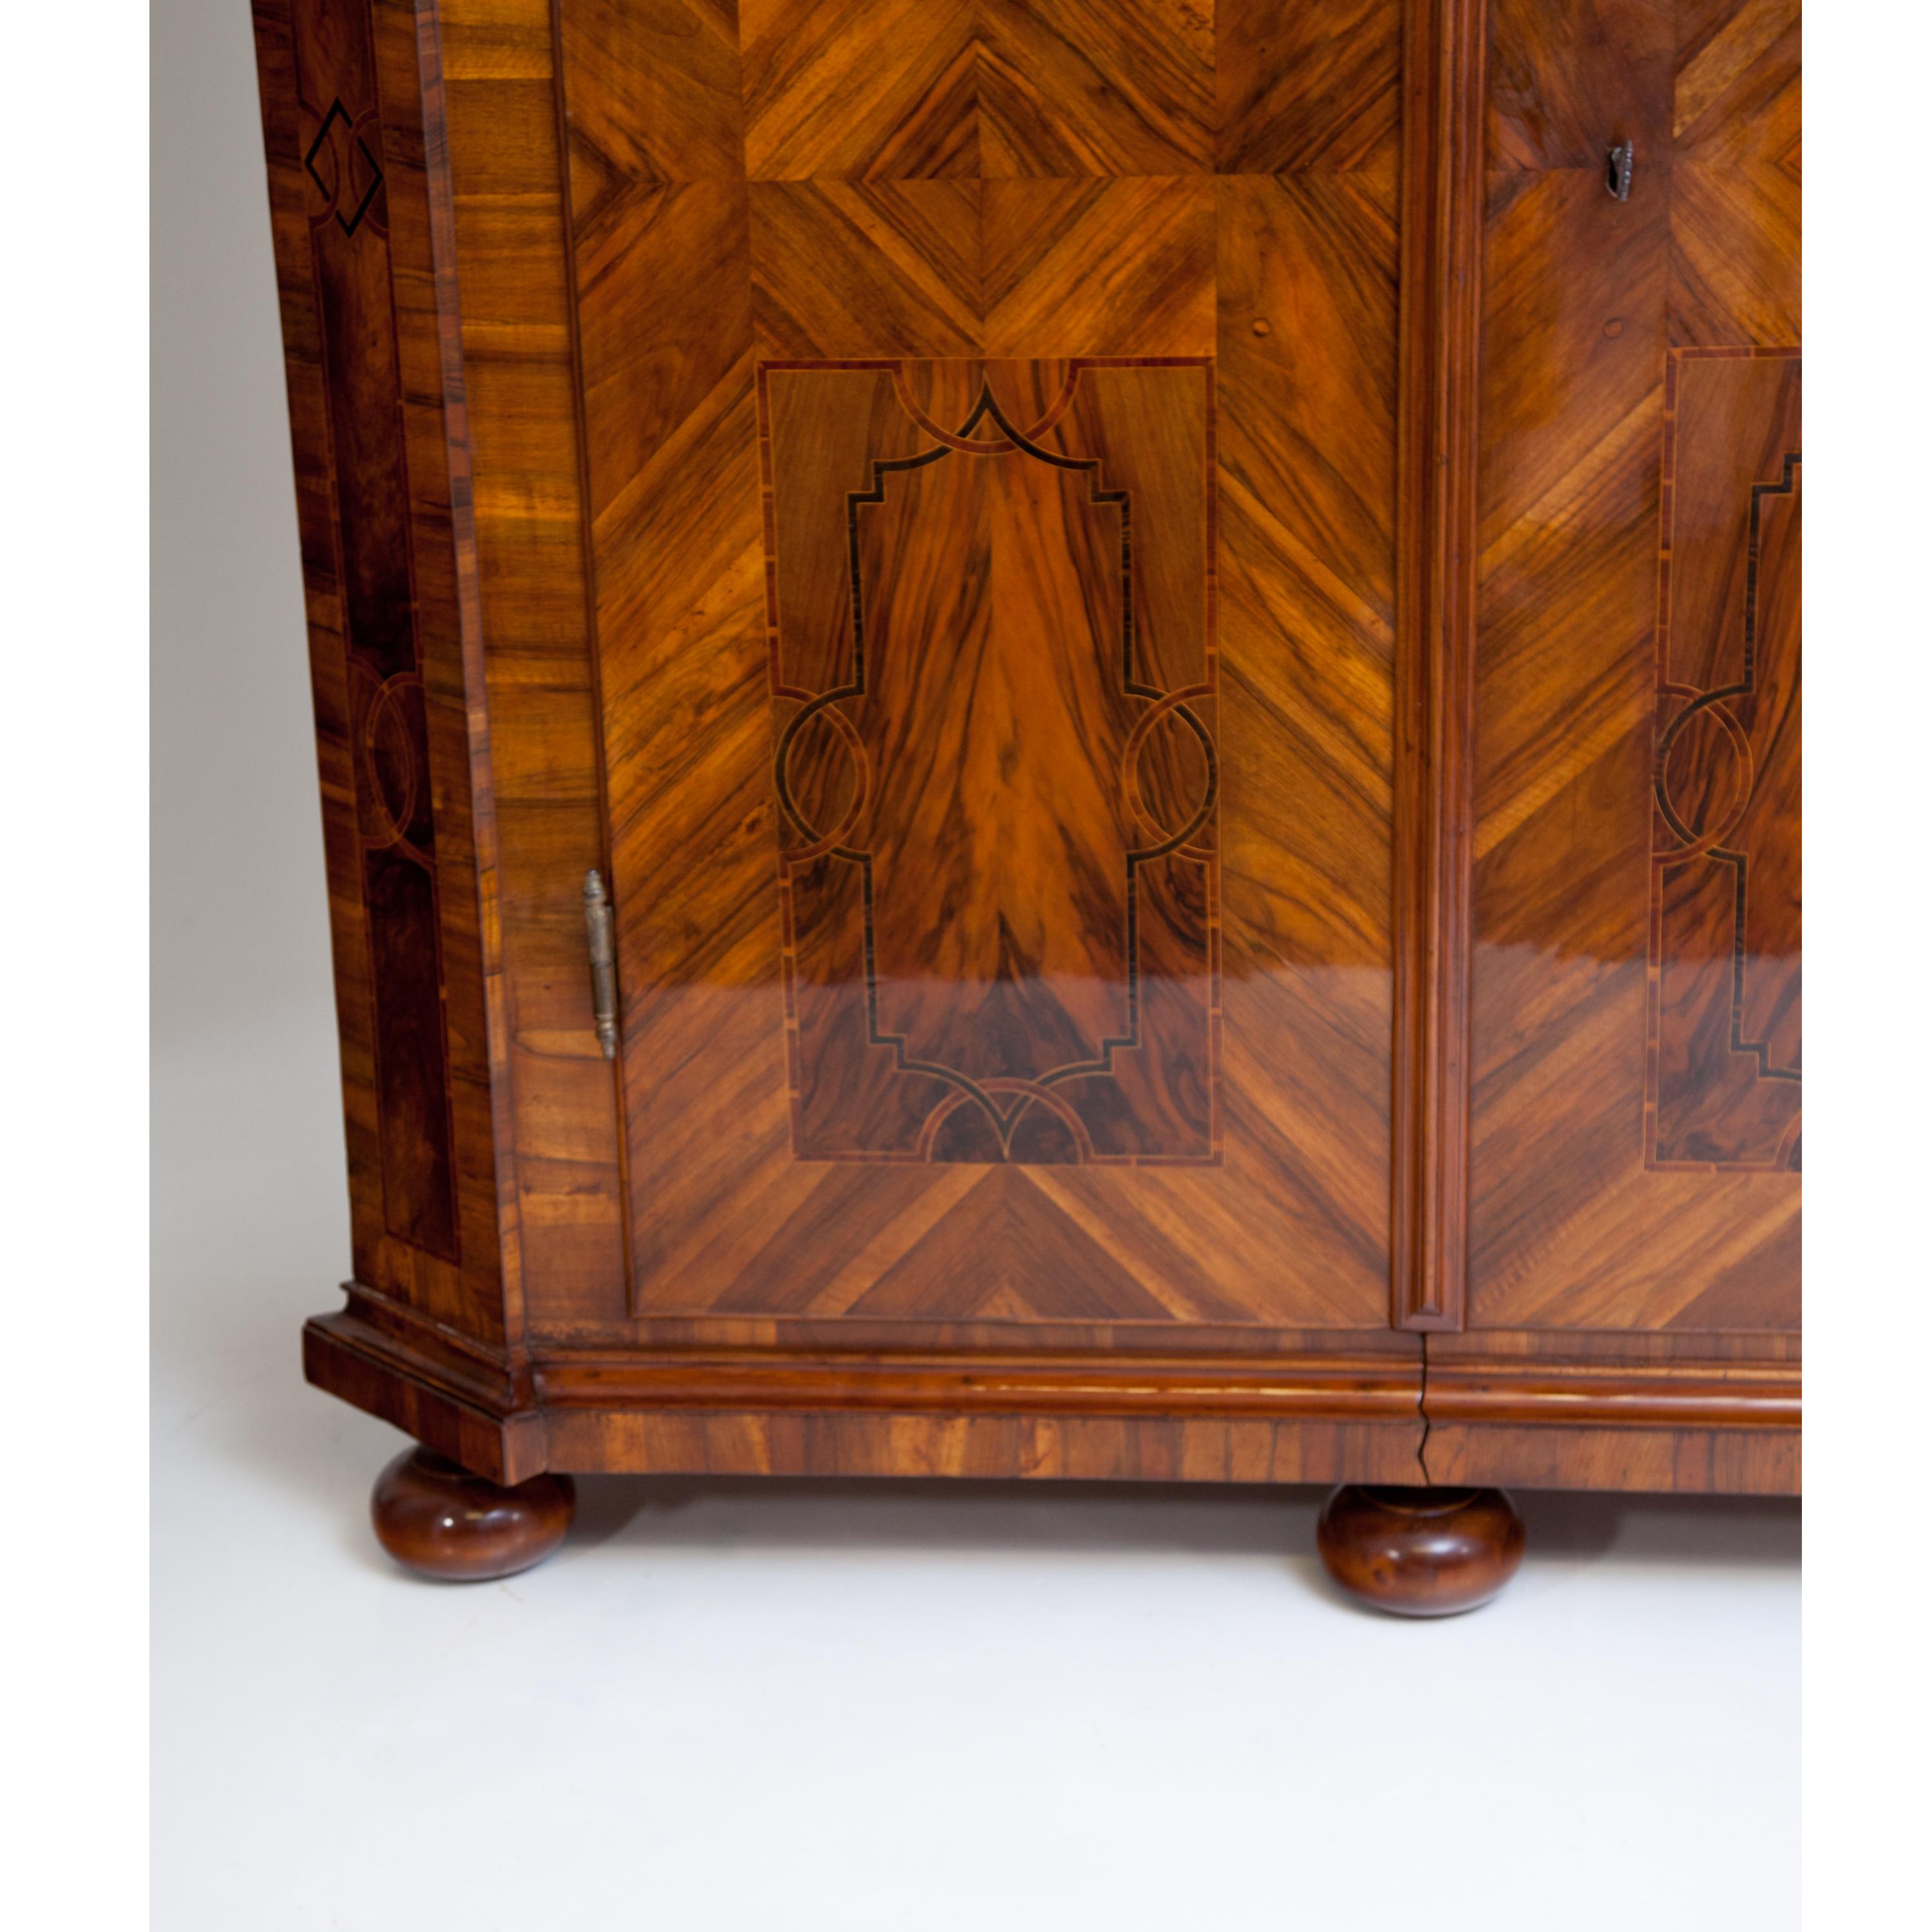 Large two-door Baroque cabinet in walnut veneer, with slightly protruding straight cornice with profiled mouldings and bevelled corners. The cabinet stands on spherical feet and shows ribbon inlays on the corners and the doors divided into four